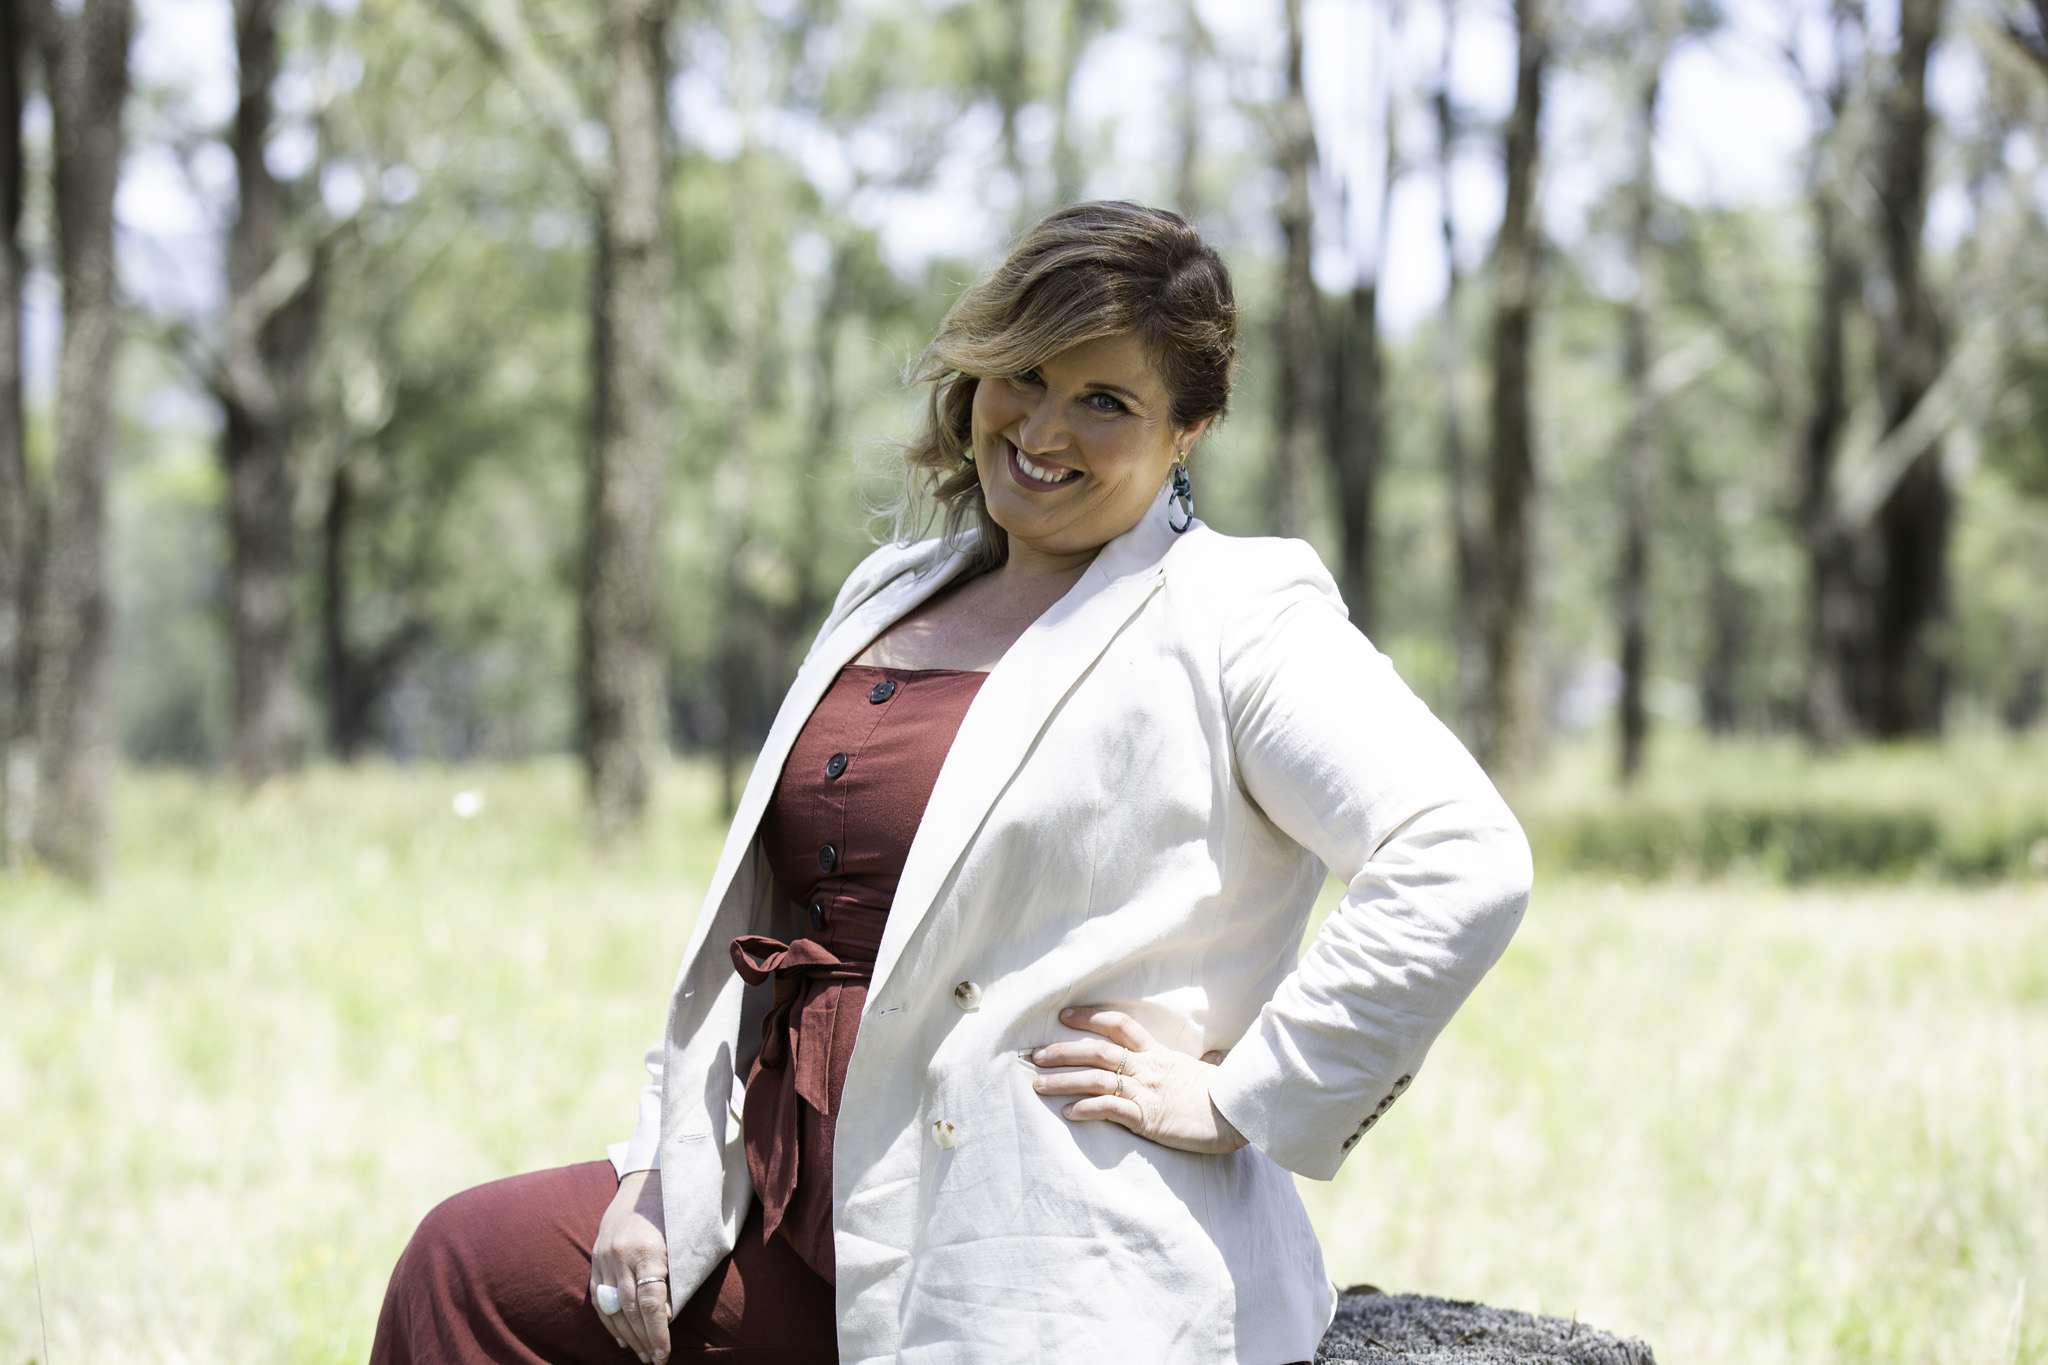 ArtyJ Photography | Corporate, NSW, Hunter Valley, Photography, Branding, Head Shots | Anja | Branding & Head Shots